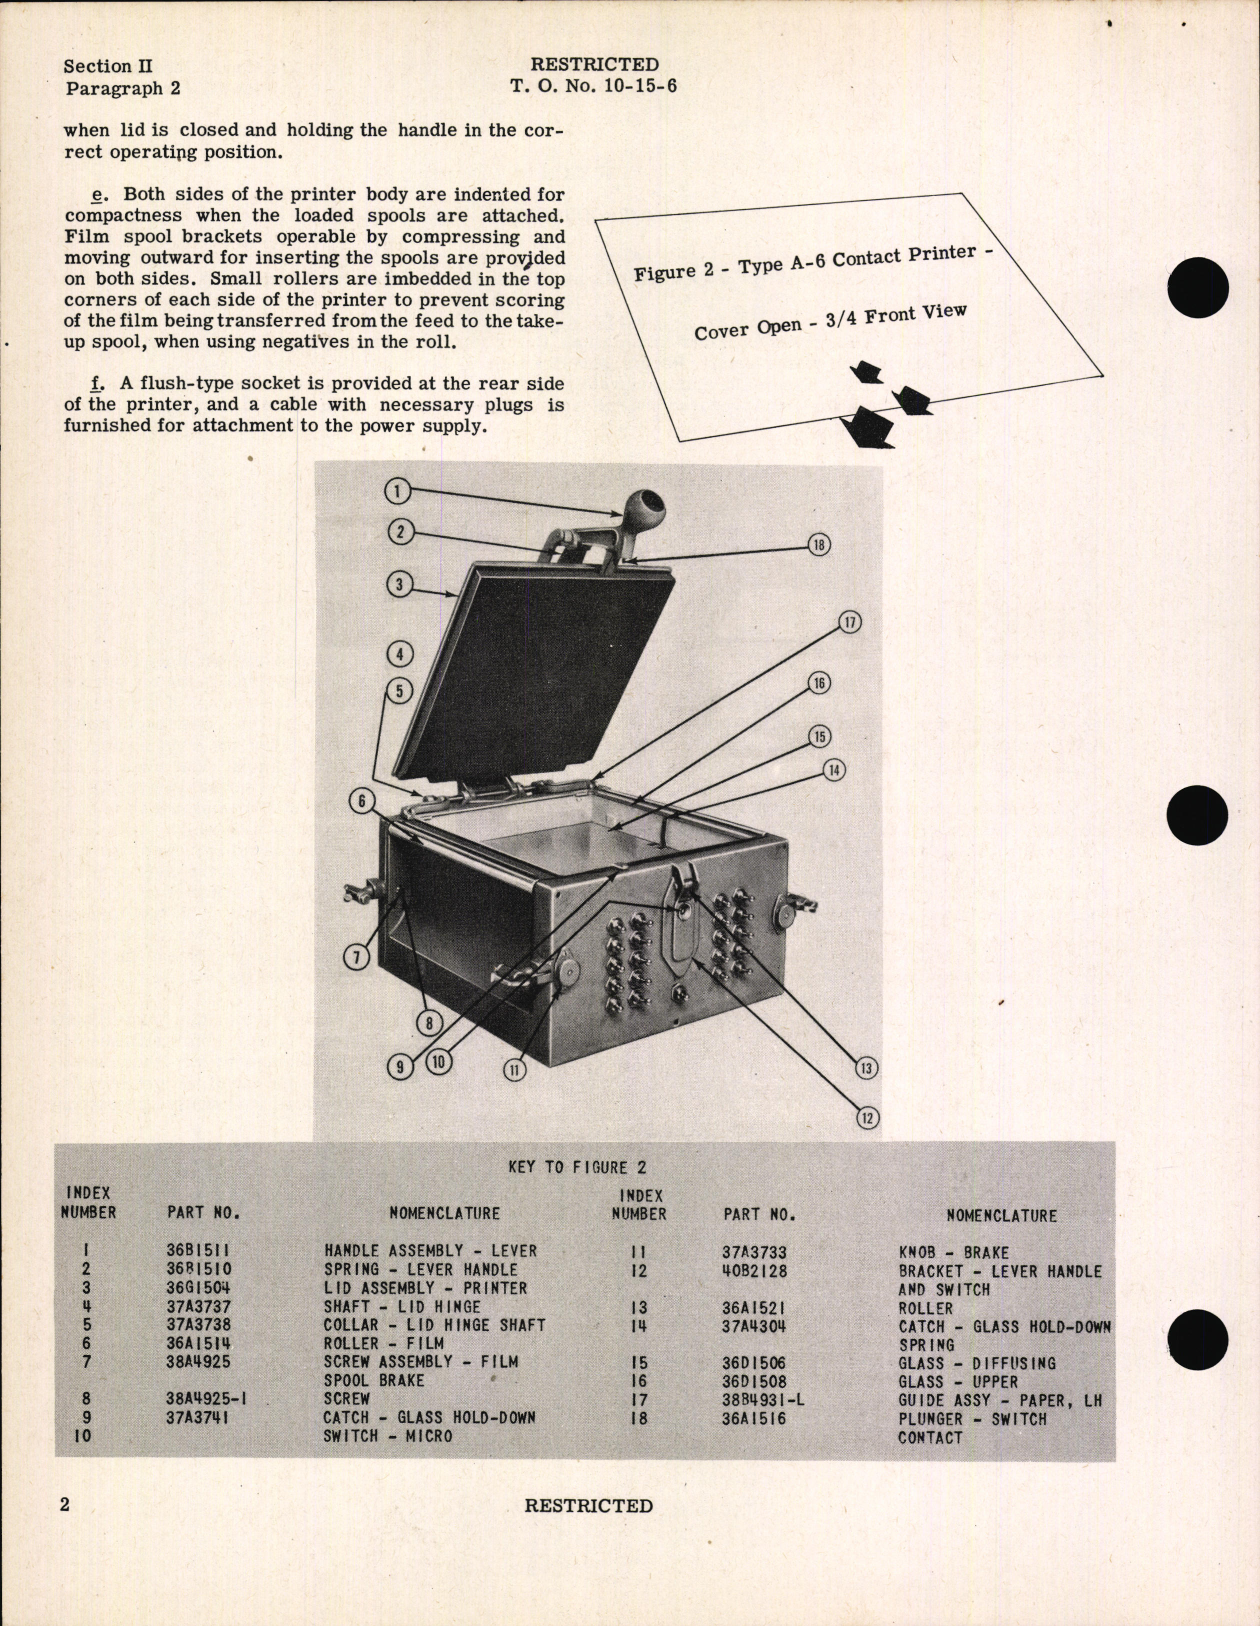 Sample page 6 from AirCorps Library document: Handbook of Instructions with Parts Catalog for Type A-6 Contact Printer For Type A Portable Laboratories